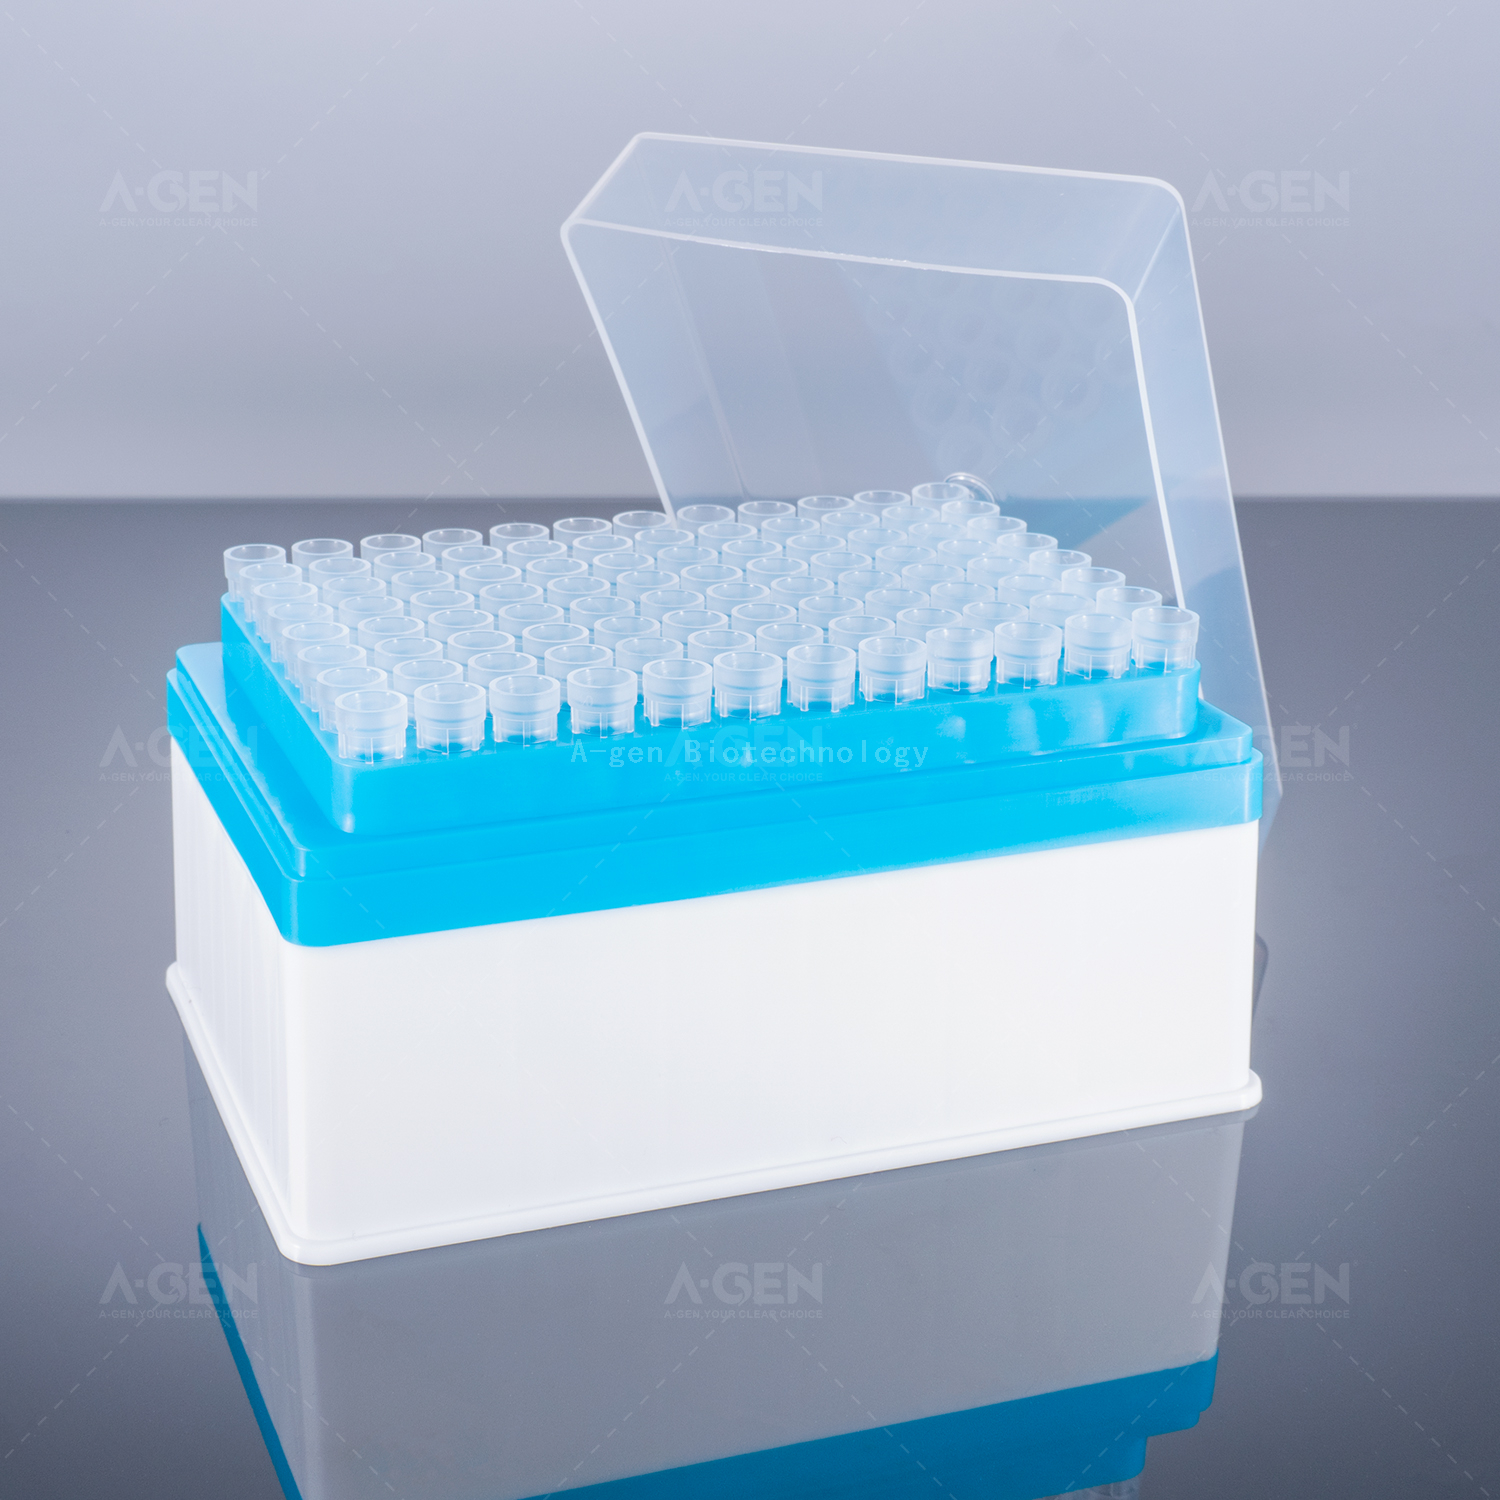 Tecan LiHa 50μL Transparent PP Pipette Tip (Racked,sterilized) for Liquid Transfer No Filter Sbs Package